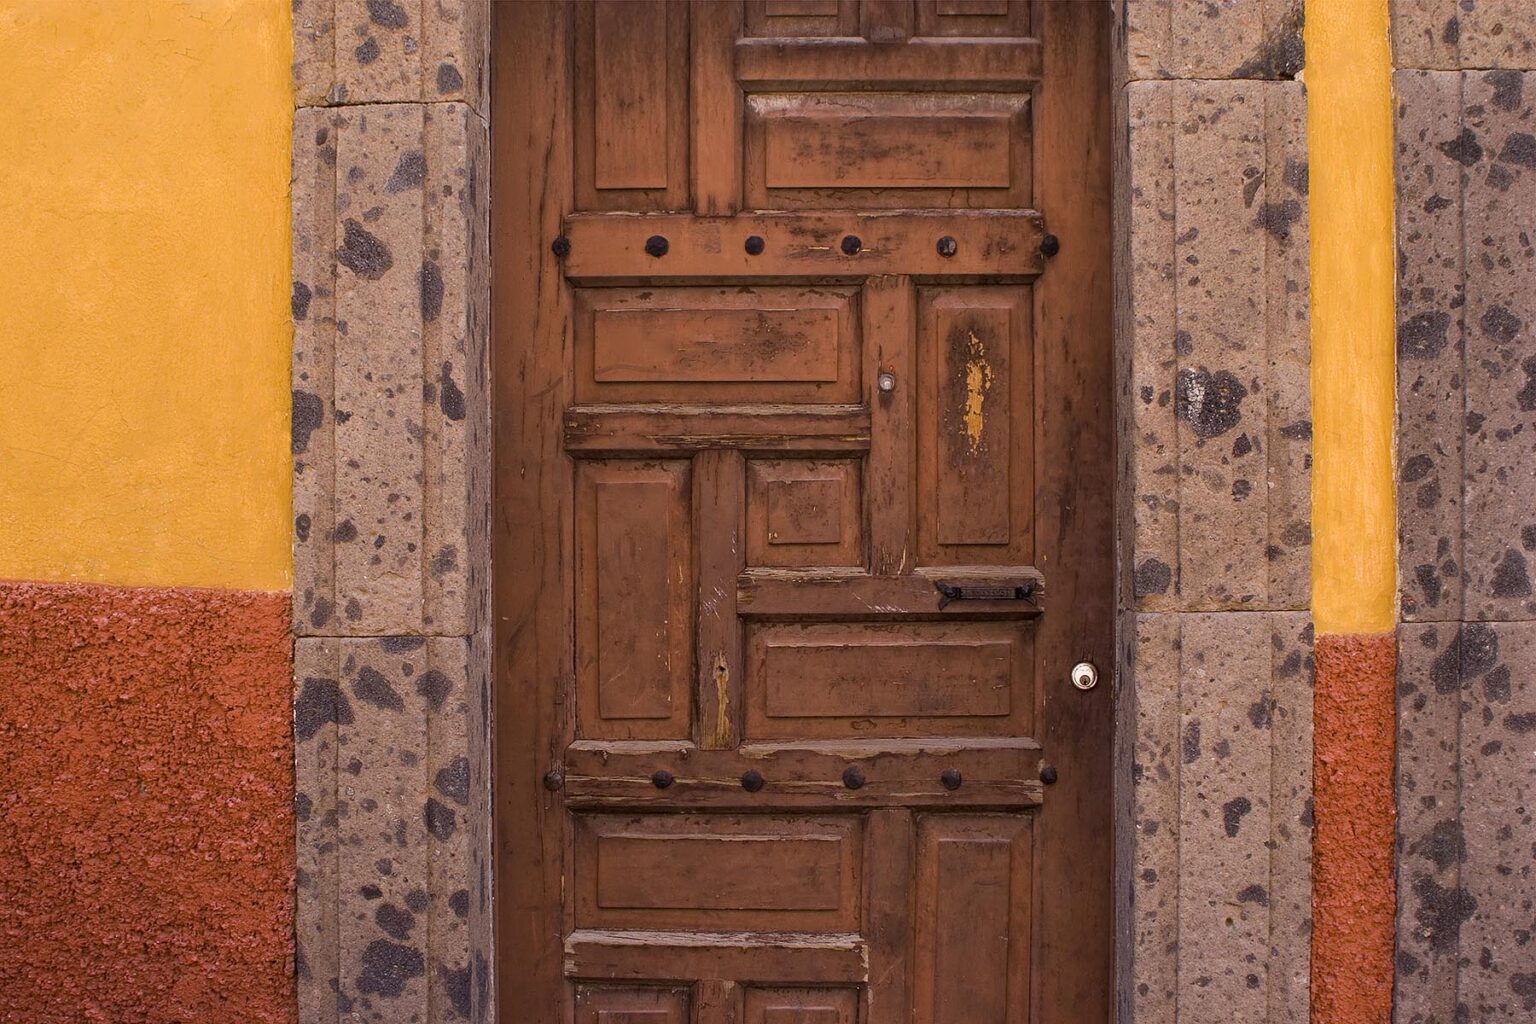 Stonework, wooden doors and bright orange and red paint are part of the architectural style of SAN MIGUEL DE ALLENDE - MEXICO